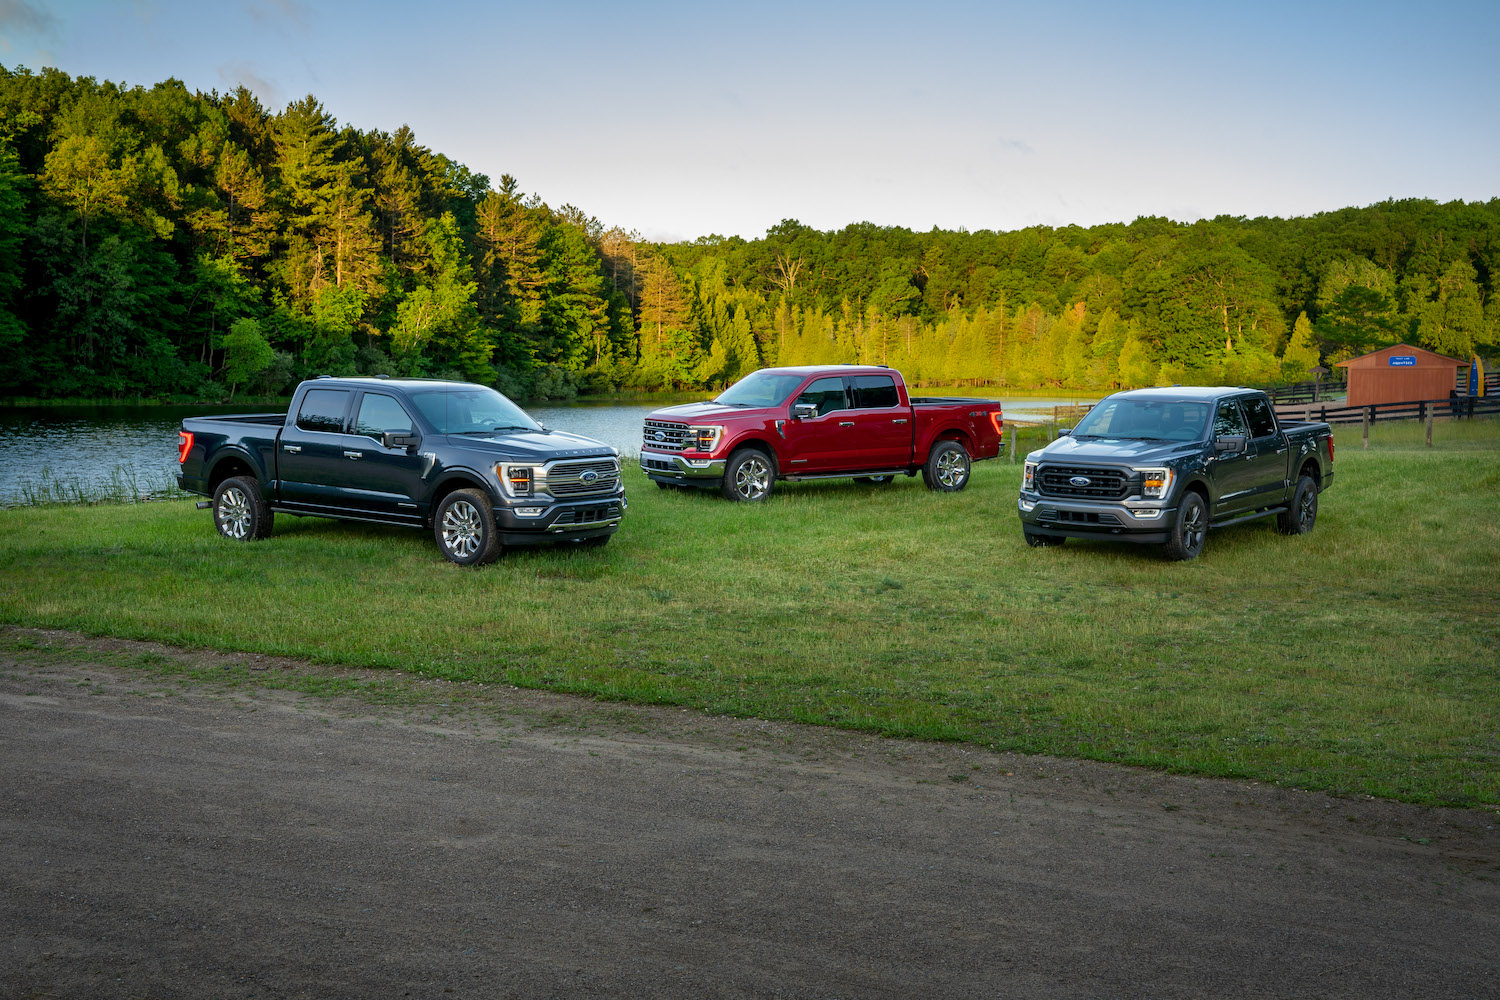 2021 Ford F-150 Lineup